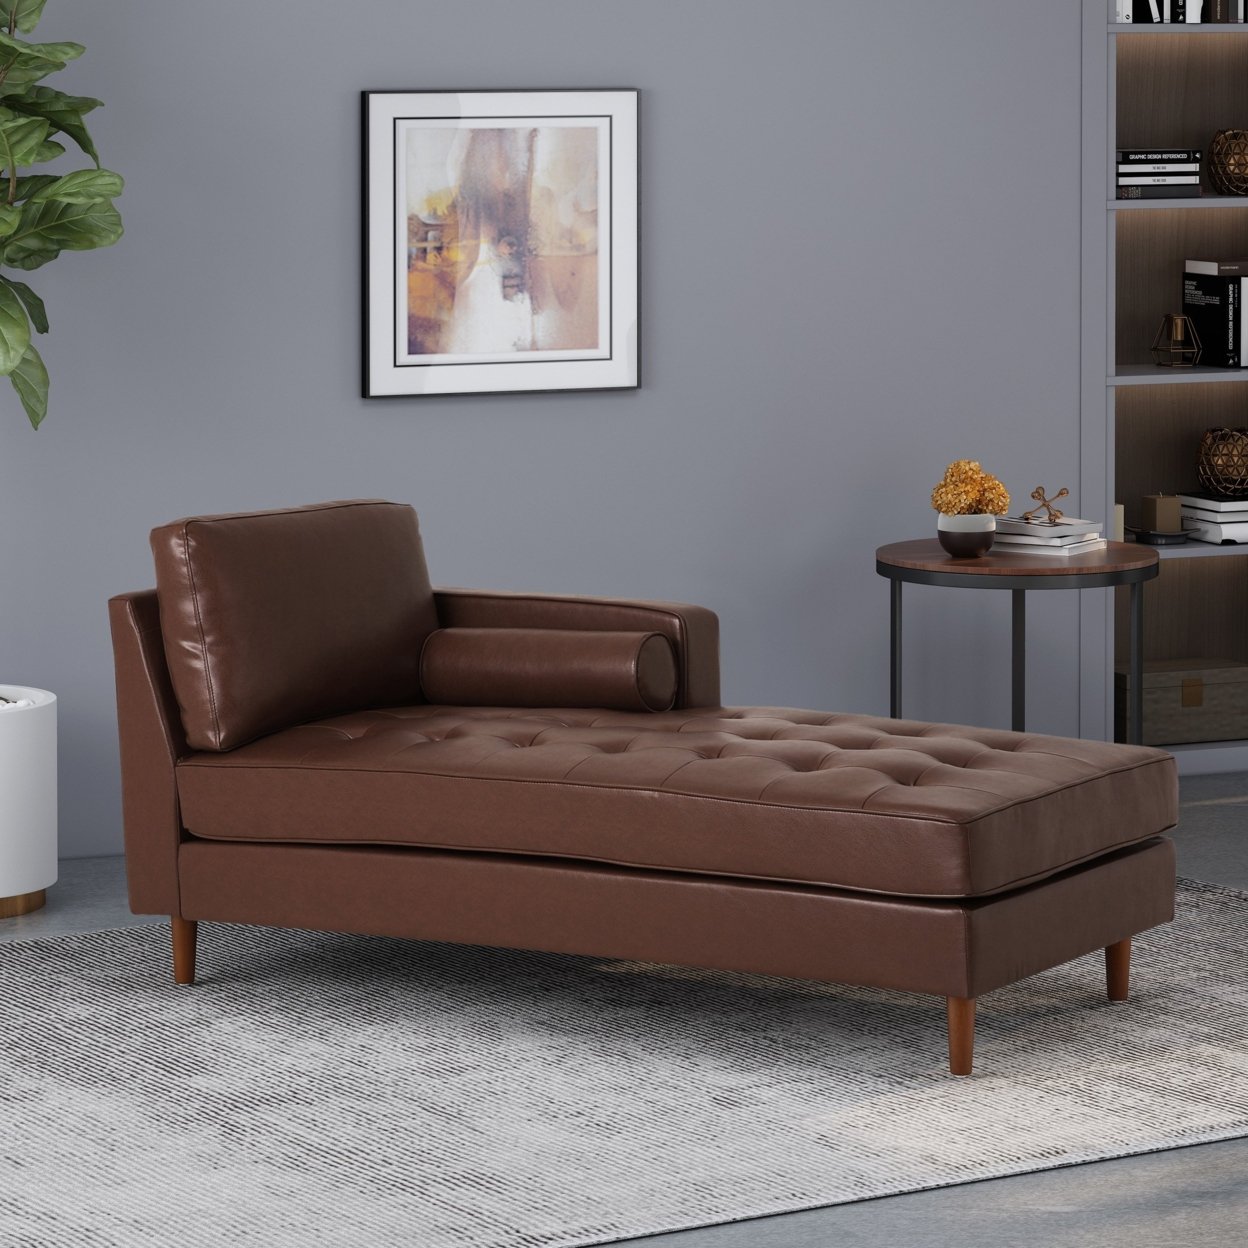 Hixon Contemporary Tufted Upholstered Chaise Lounge - Espresso/dark Brown